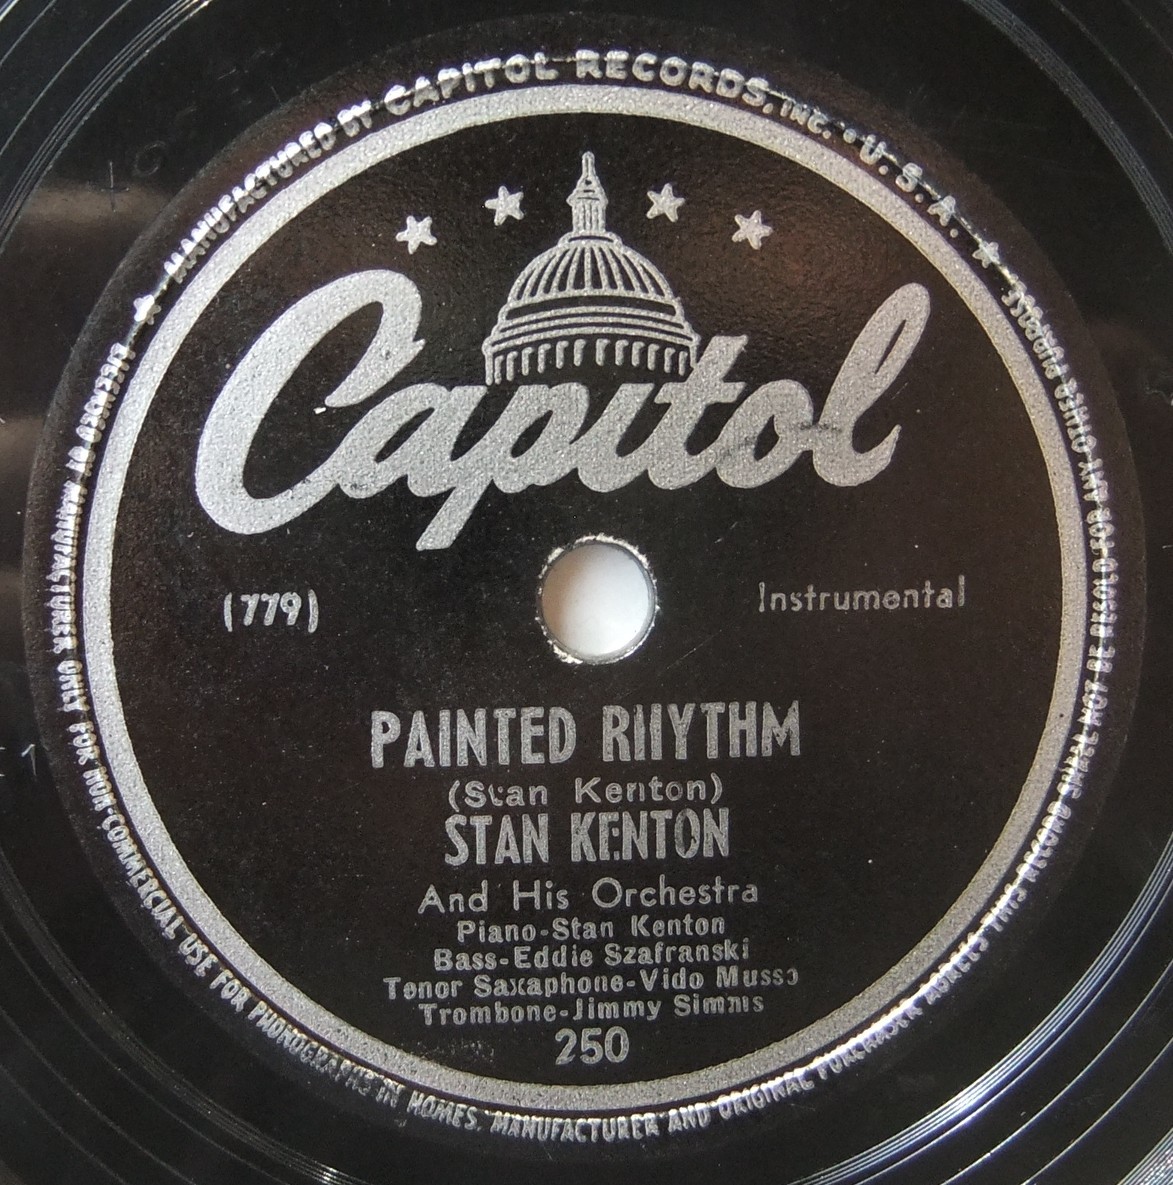 ◆ STAN KENTON ◆ Painted Rhythm / Four Months, Three Weeks, Two Days, One Hour Blues (JUNE CHRISTY) ◆ Capitol 250 (78rpm SP ◆の画像1